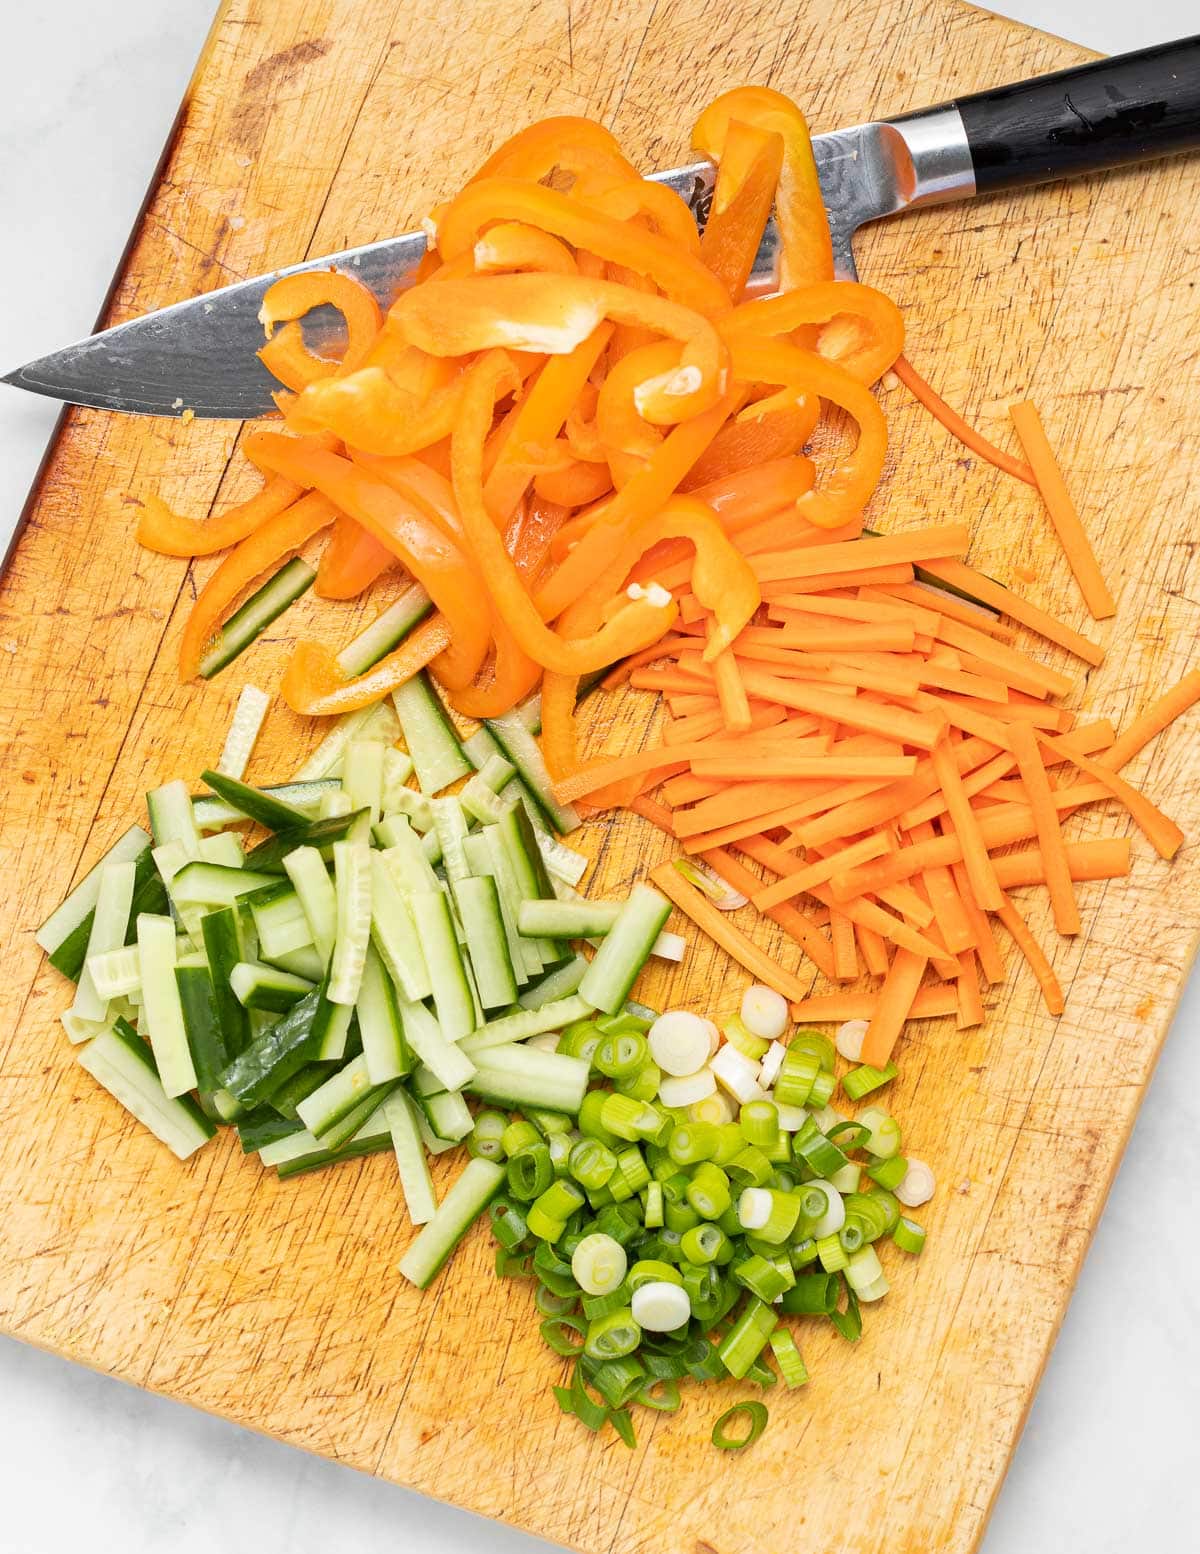 chopped vegetables on a wooden board